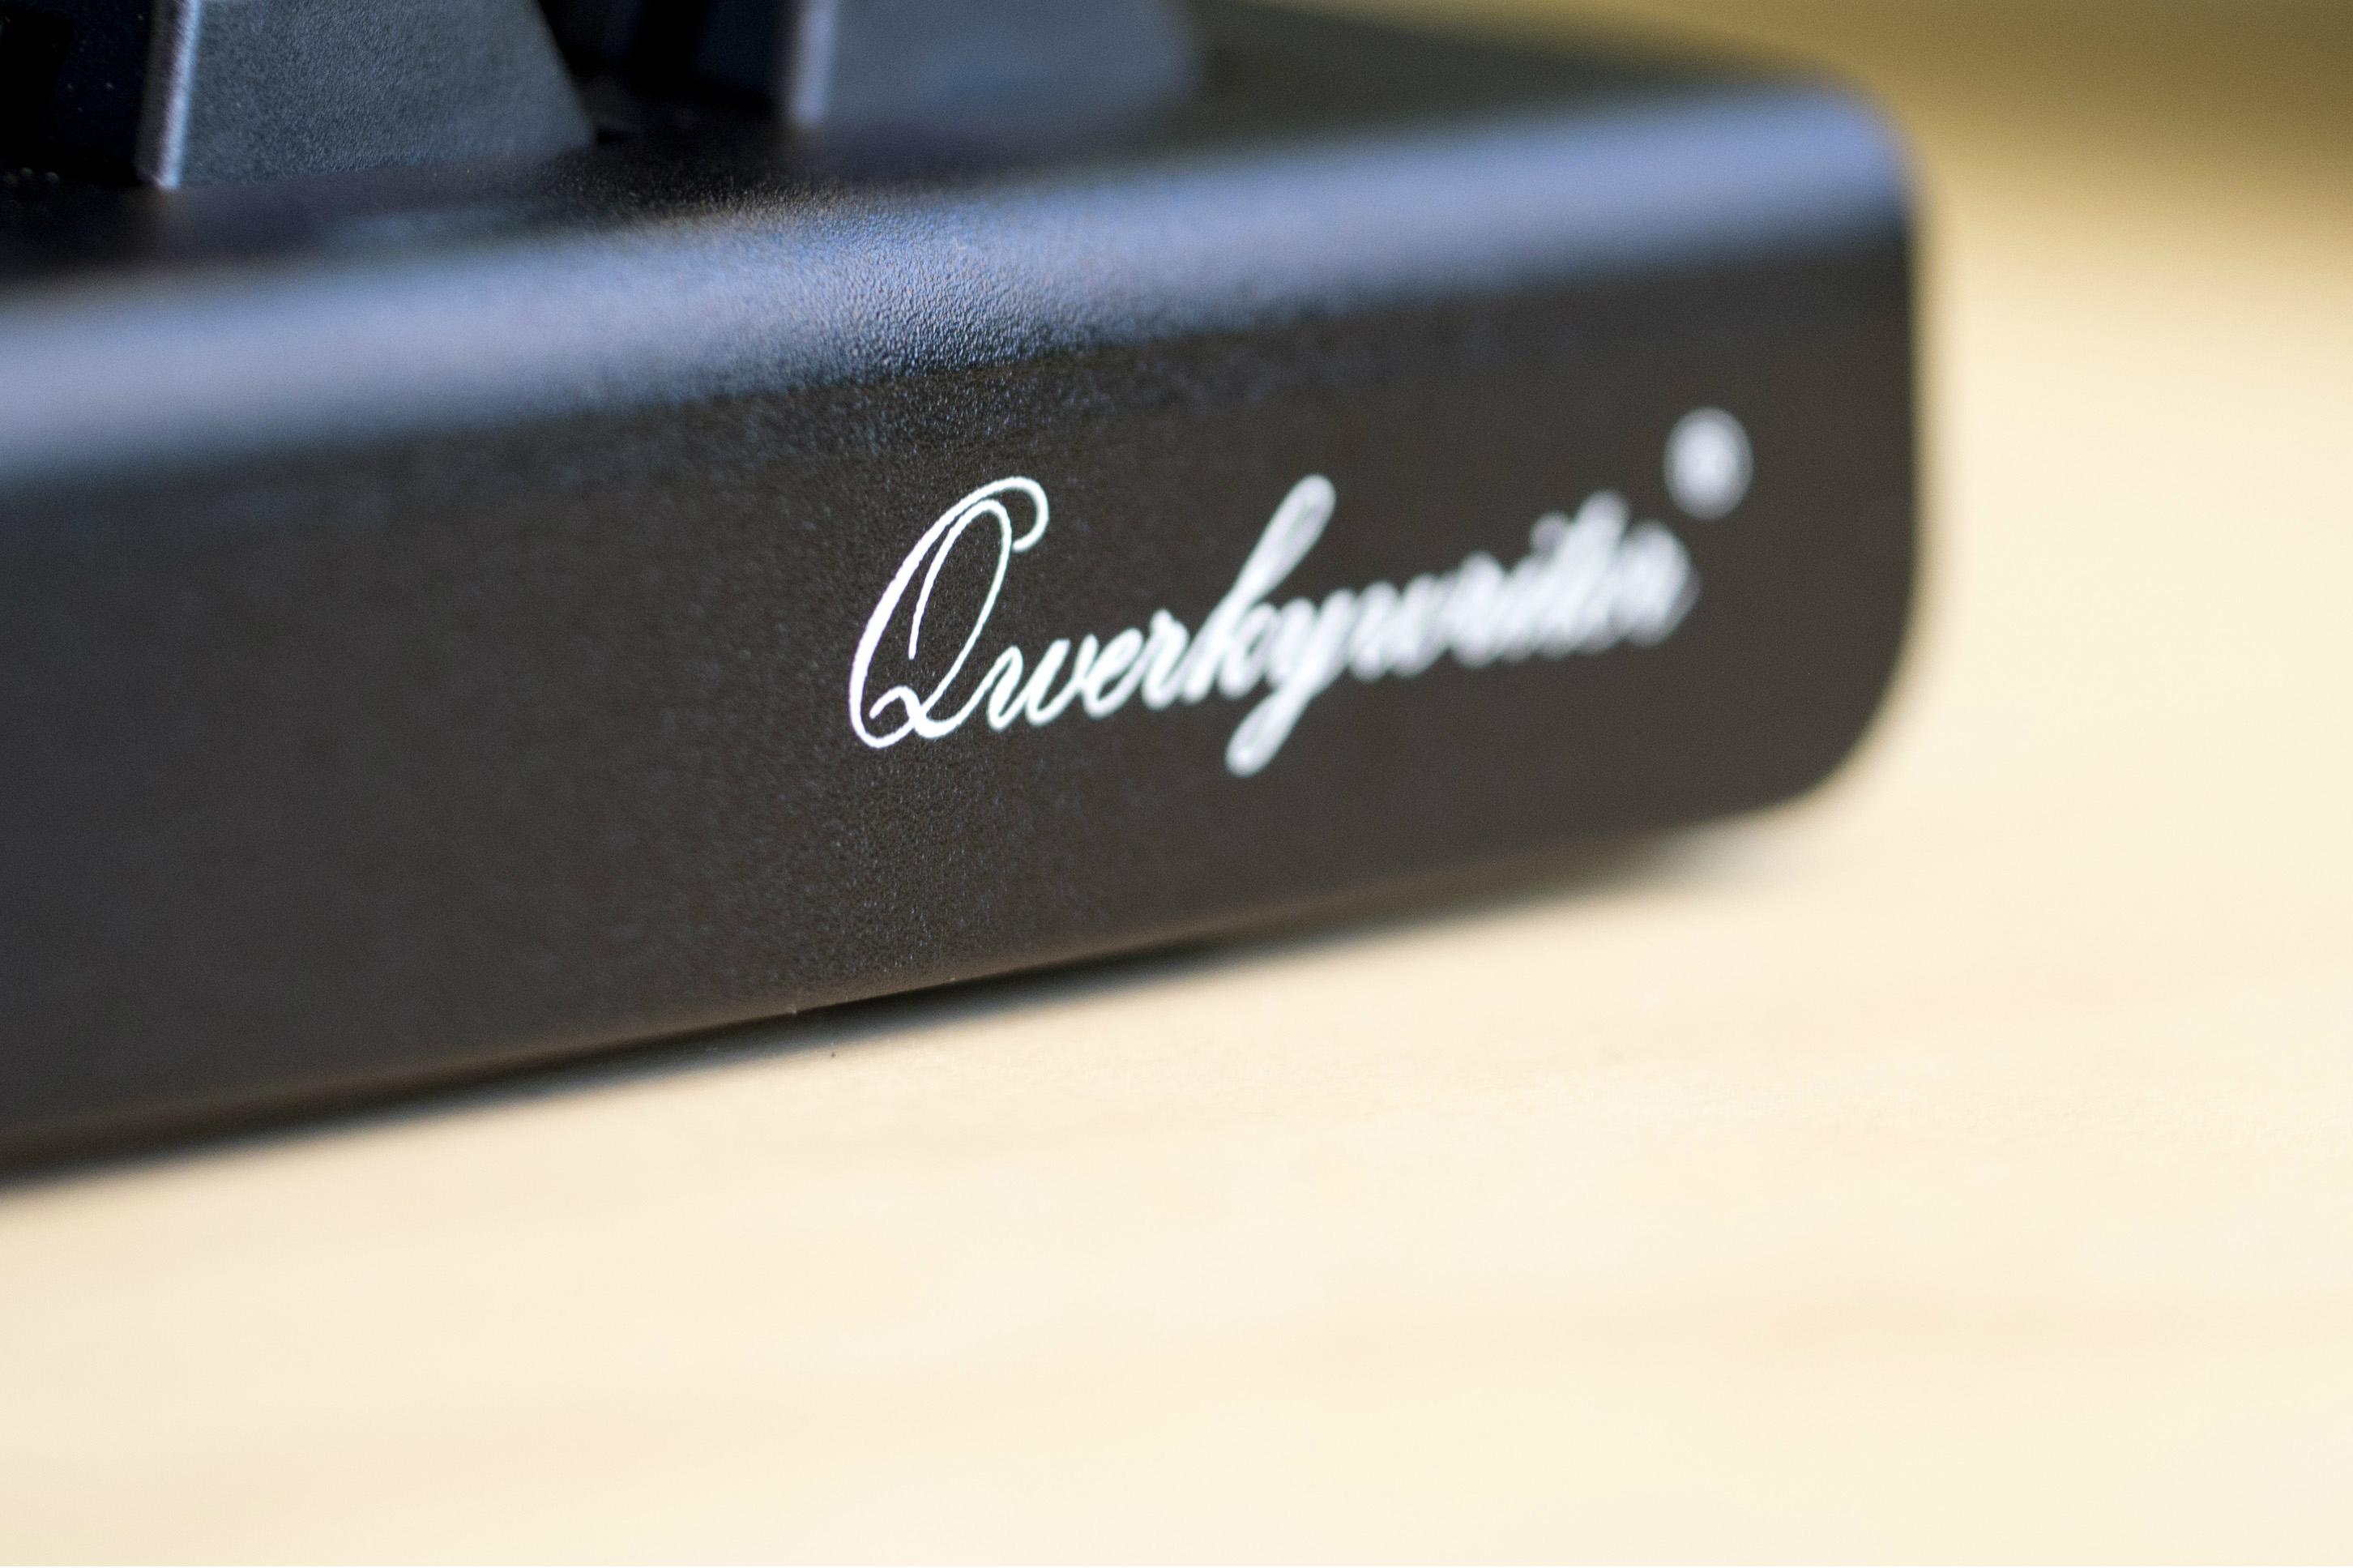 meet the keyboard that turns your tablet into a typewriter kinda qwerkywriter signature